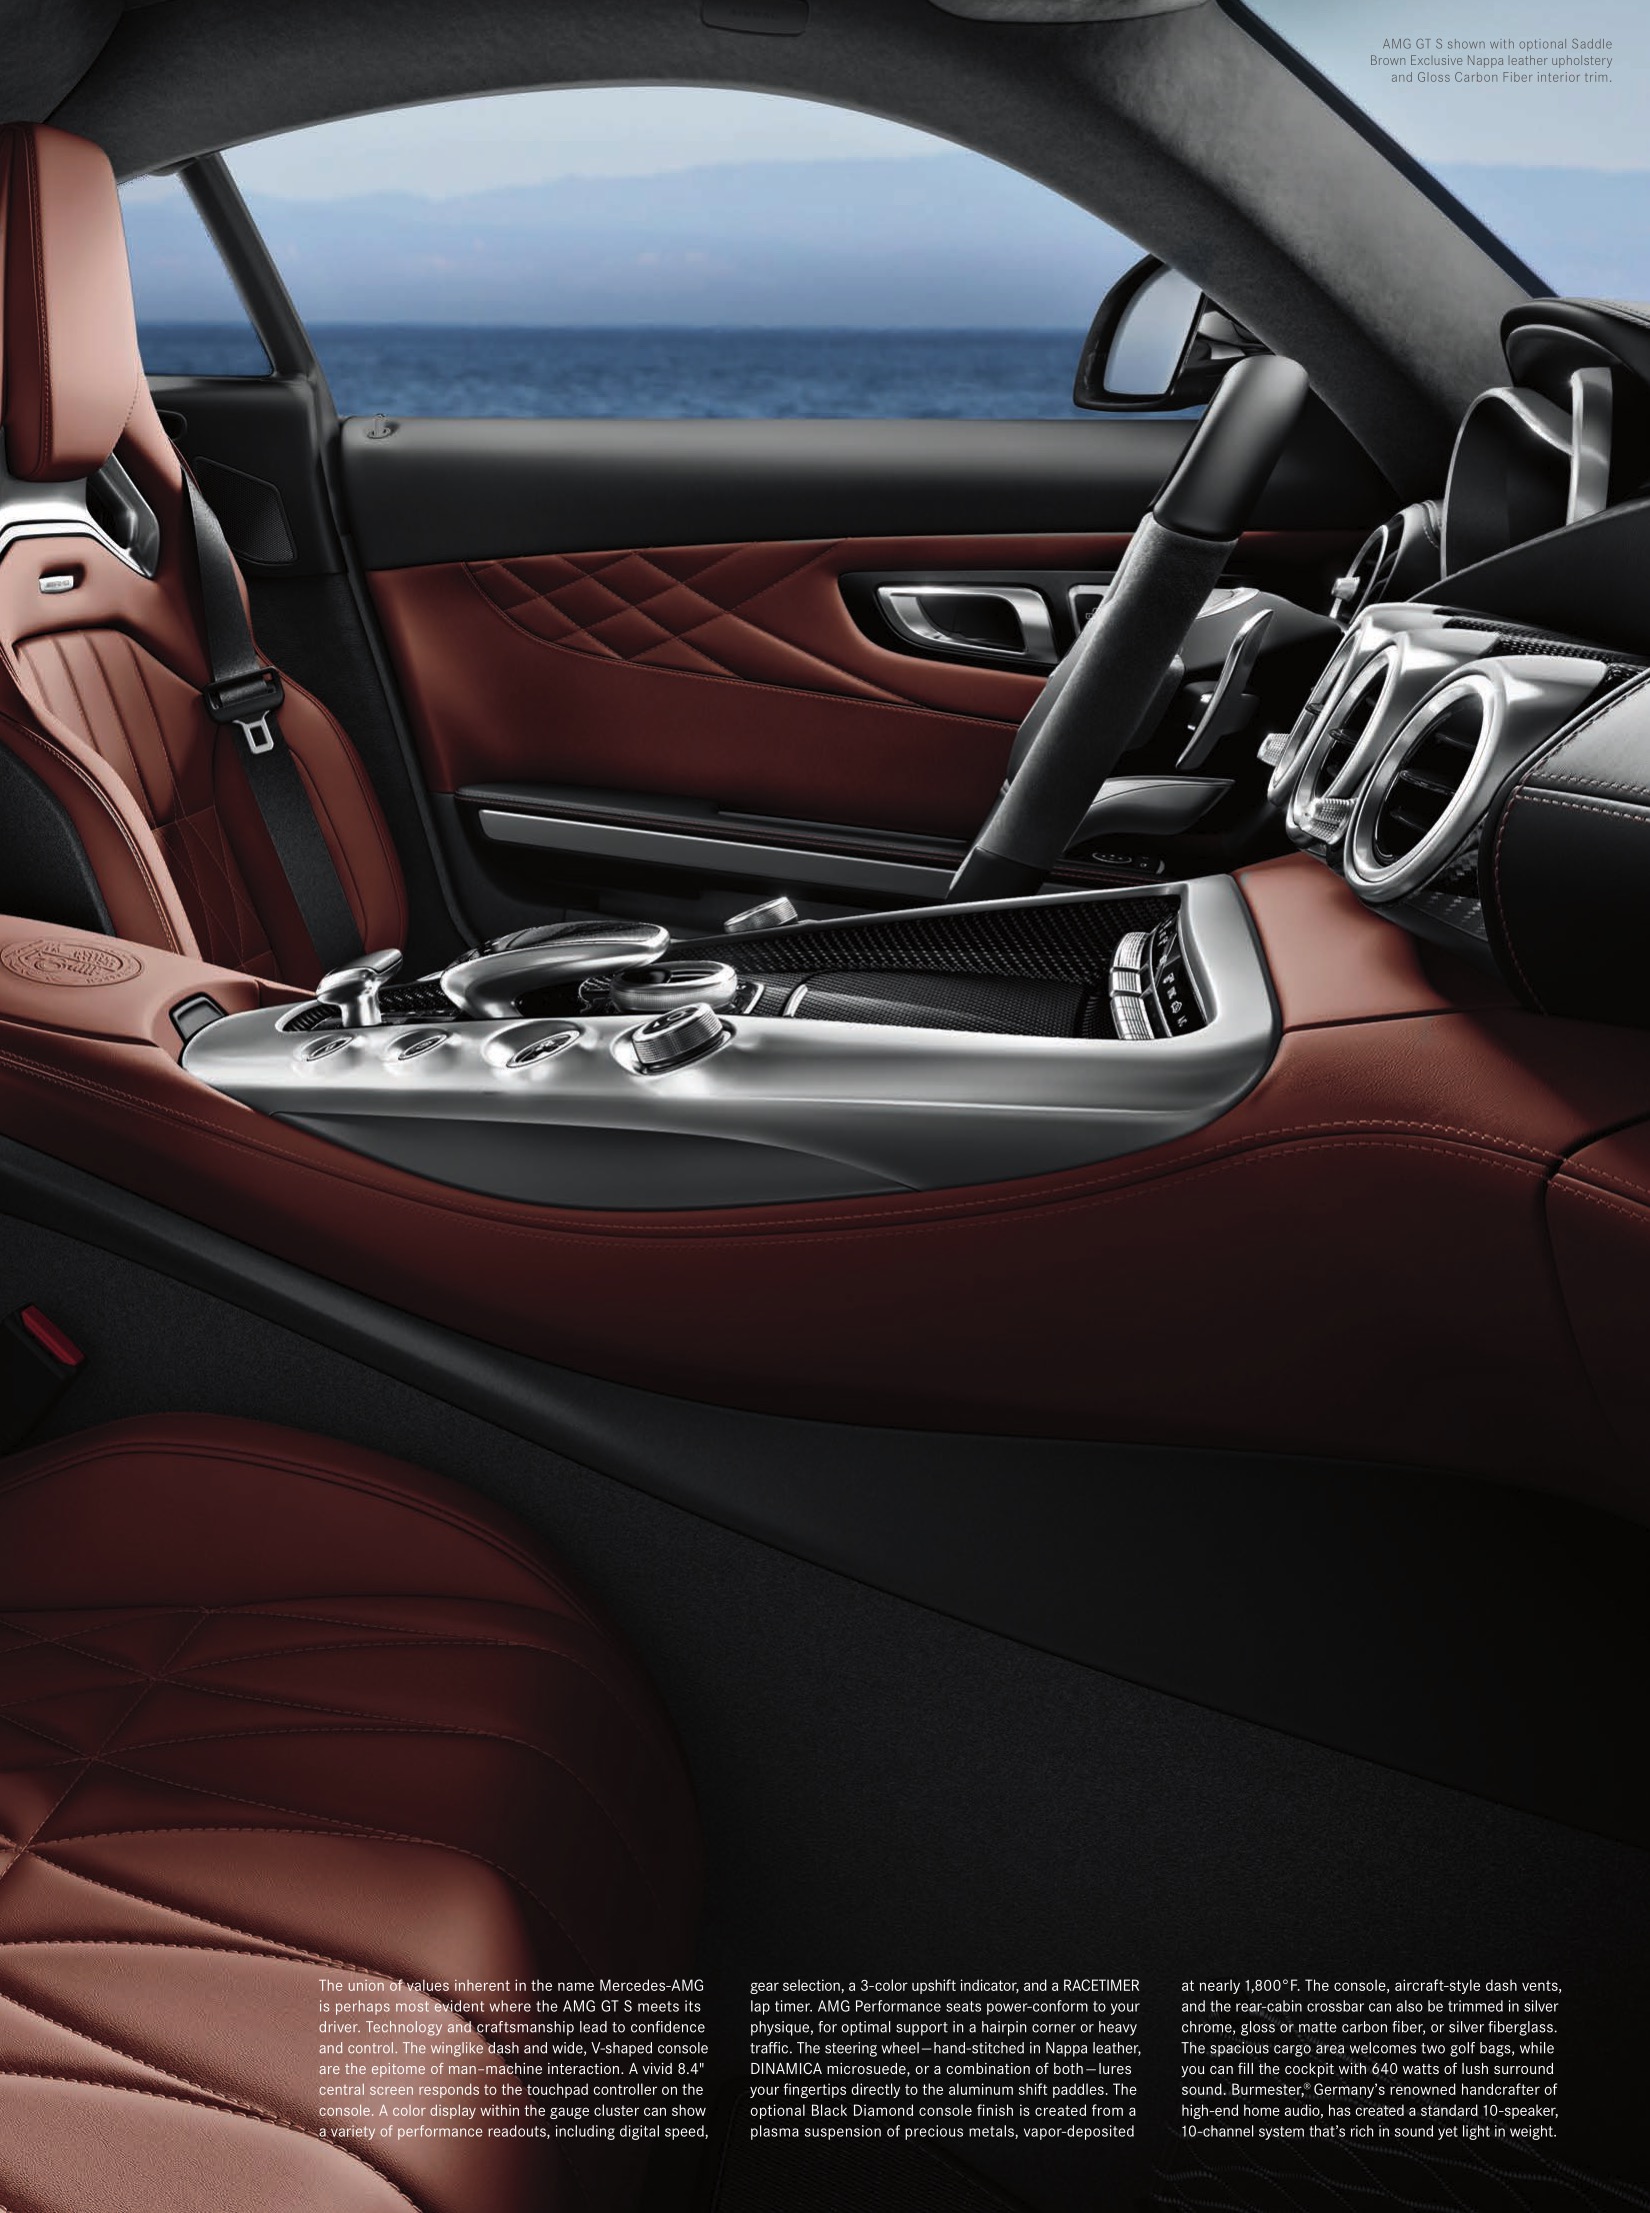 2016 Mercedes-Benz AMG GTS Brochure Page 2